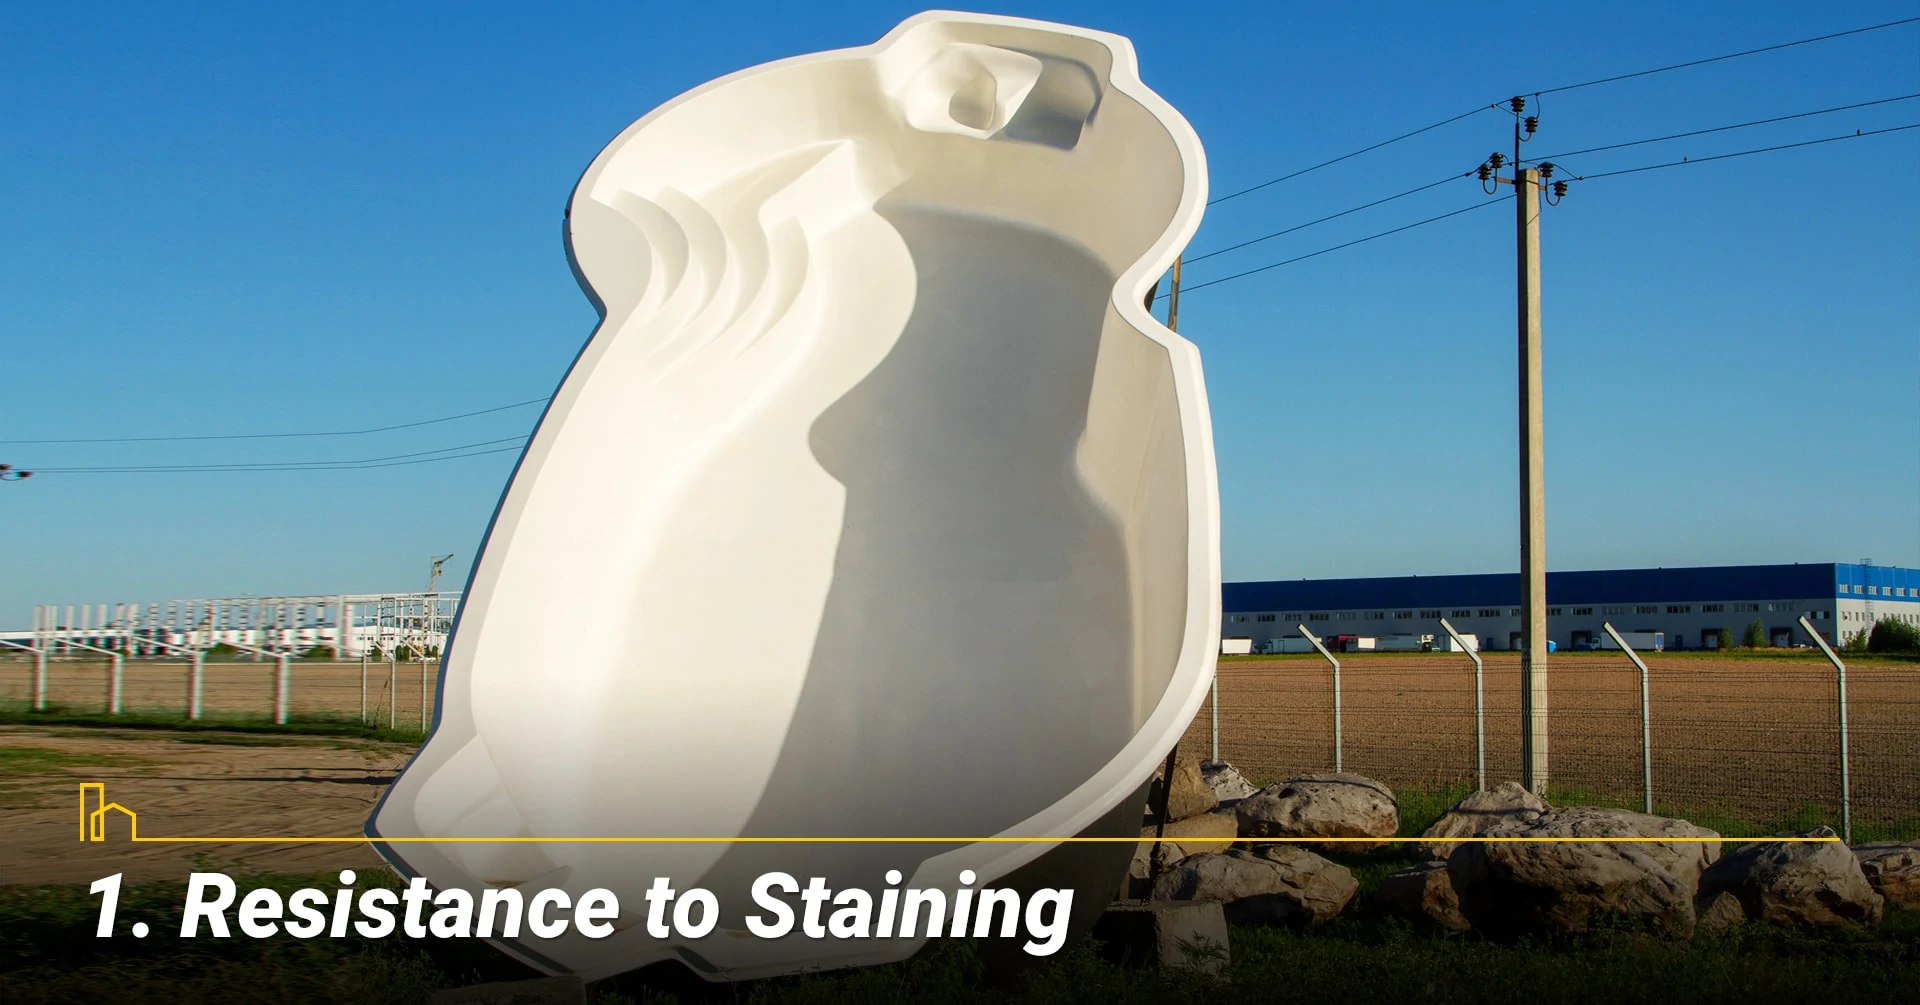 Resistance to Staining, protection from stains